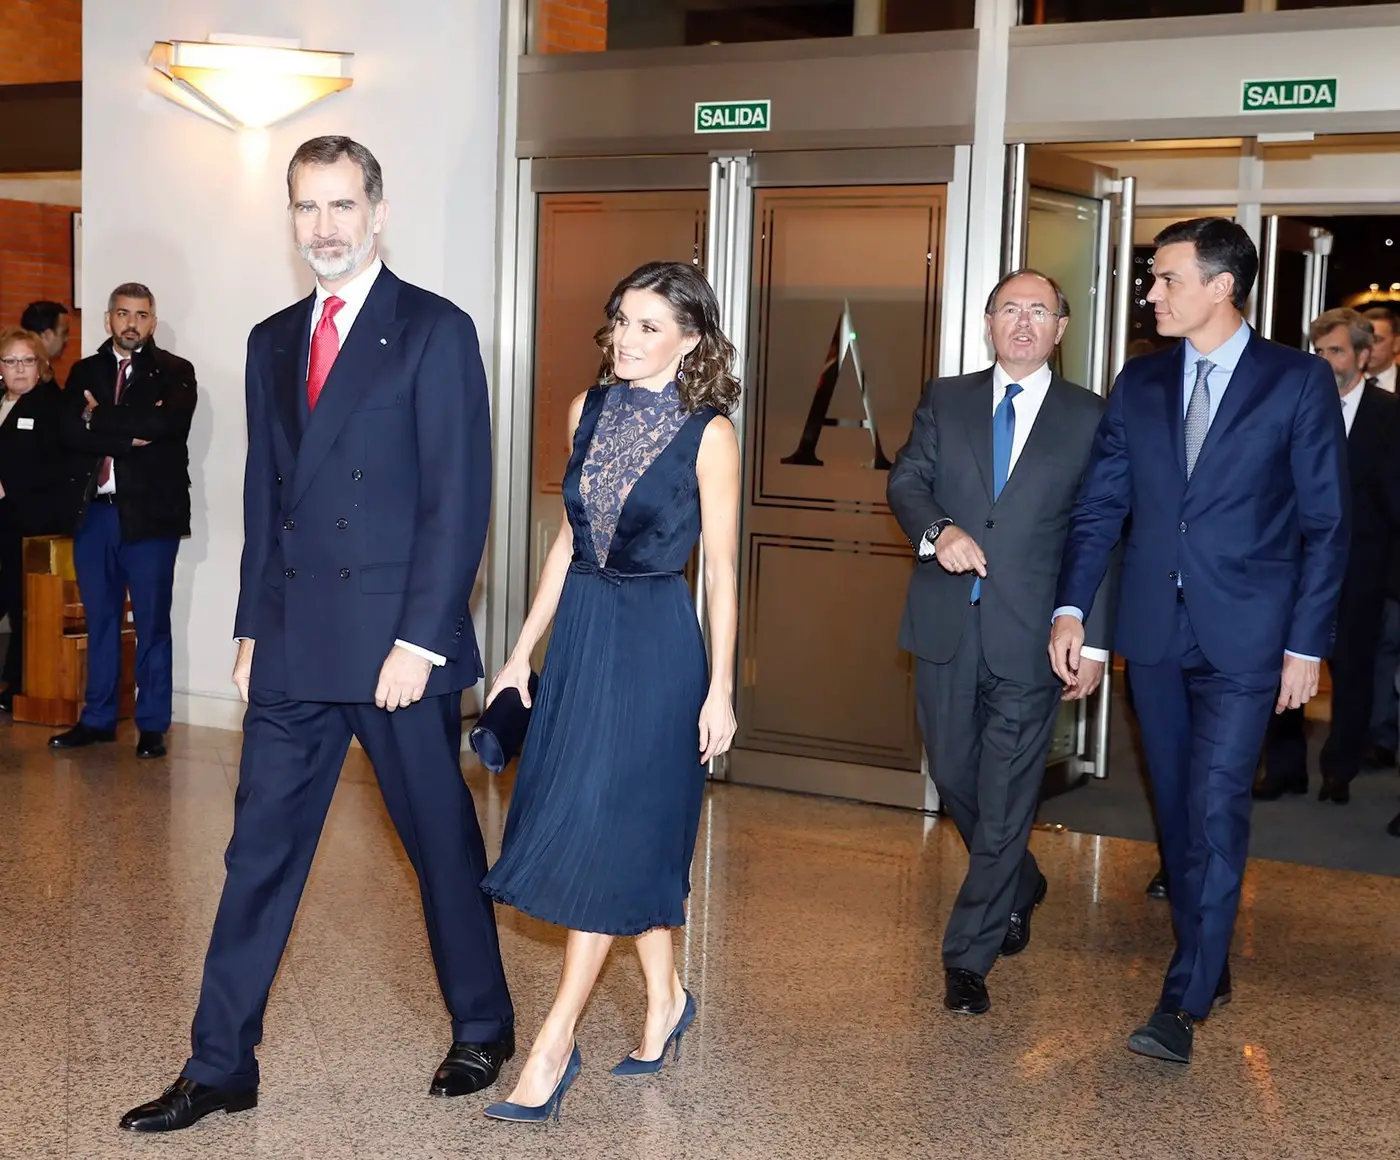 Queen Letizia of Spain wore a satin blue midi dress at Concert for Constitution at 40